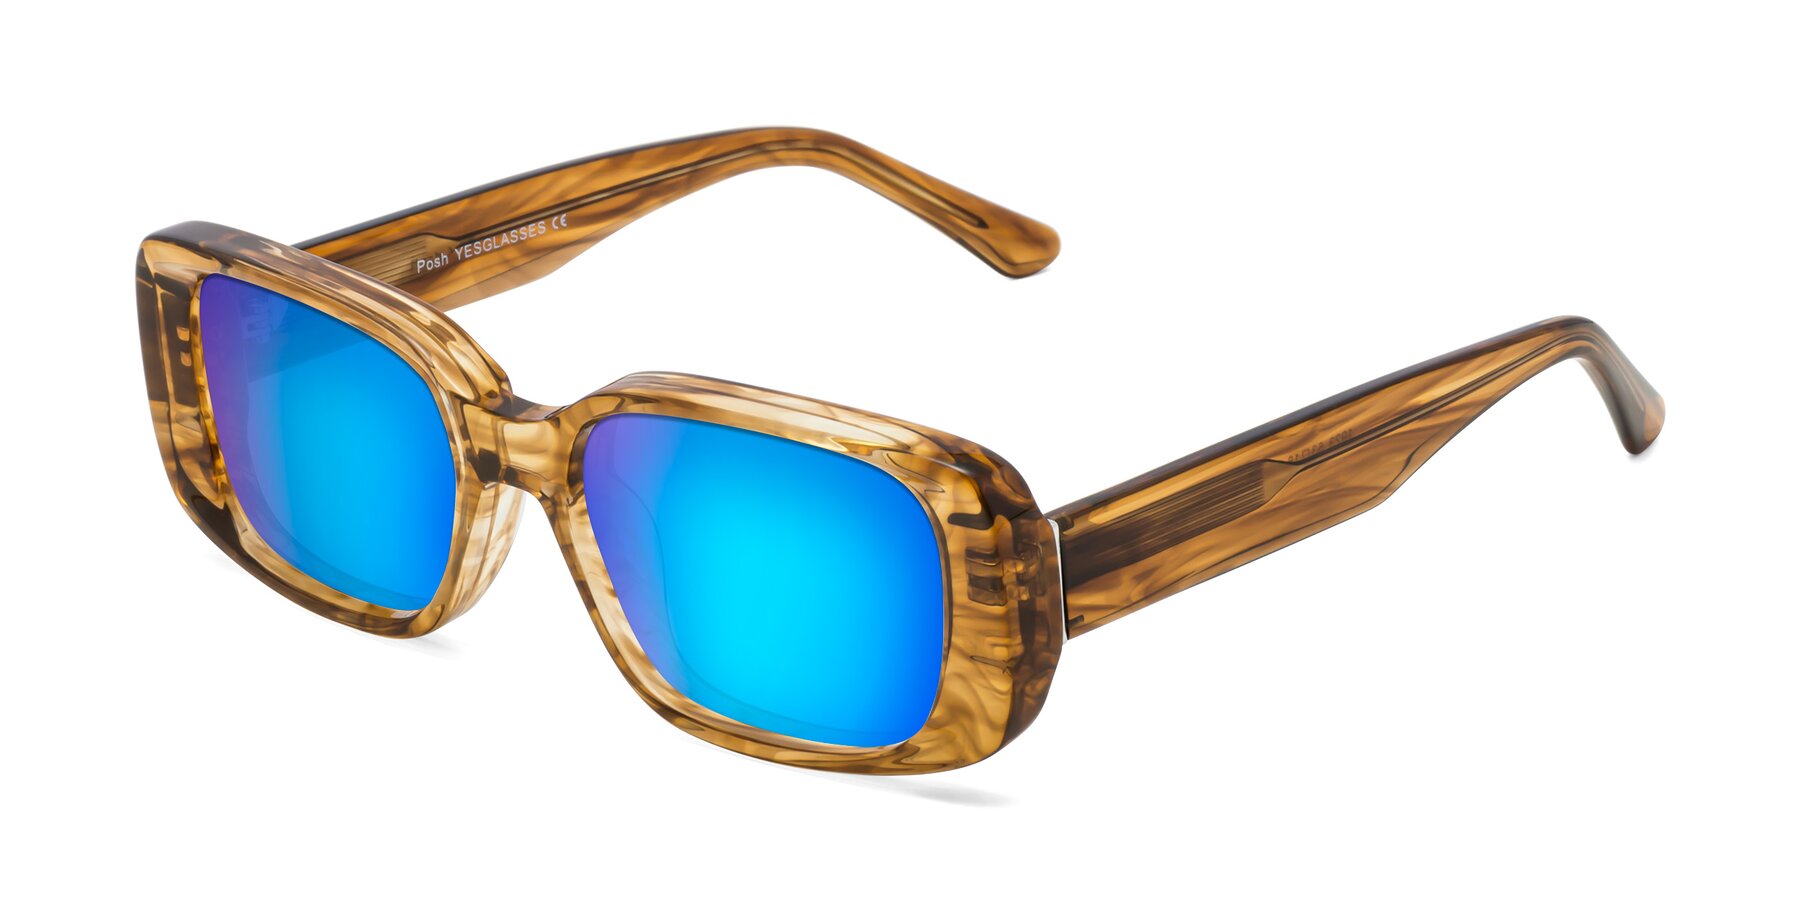 Angle of Posh in Stripe Amber with Blue Mirrored Lenses